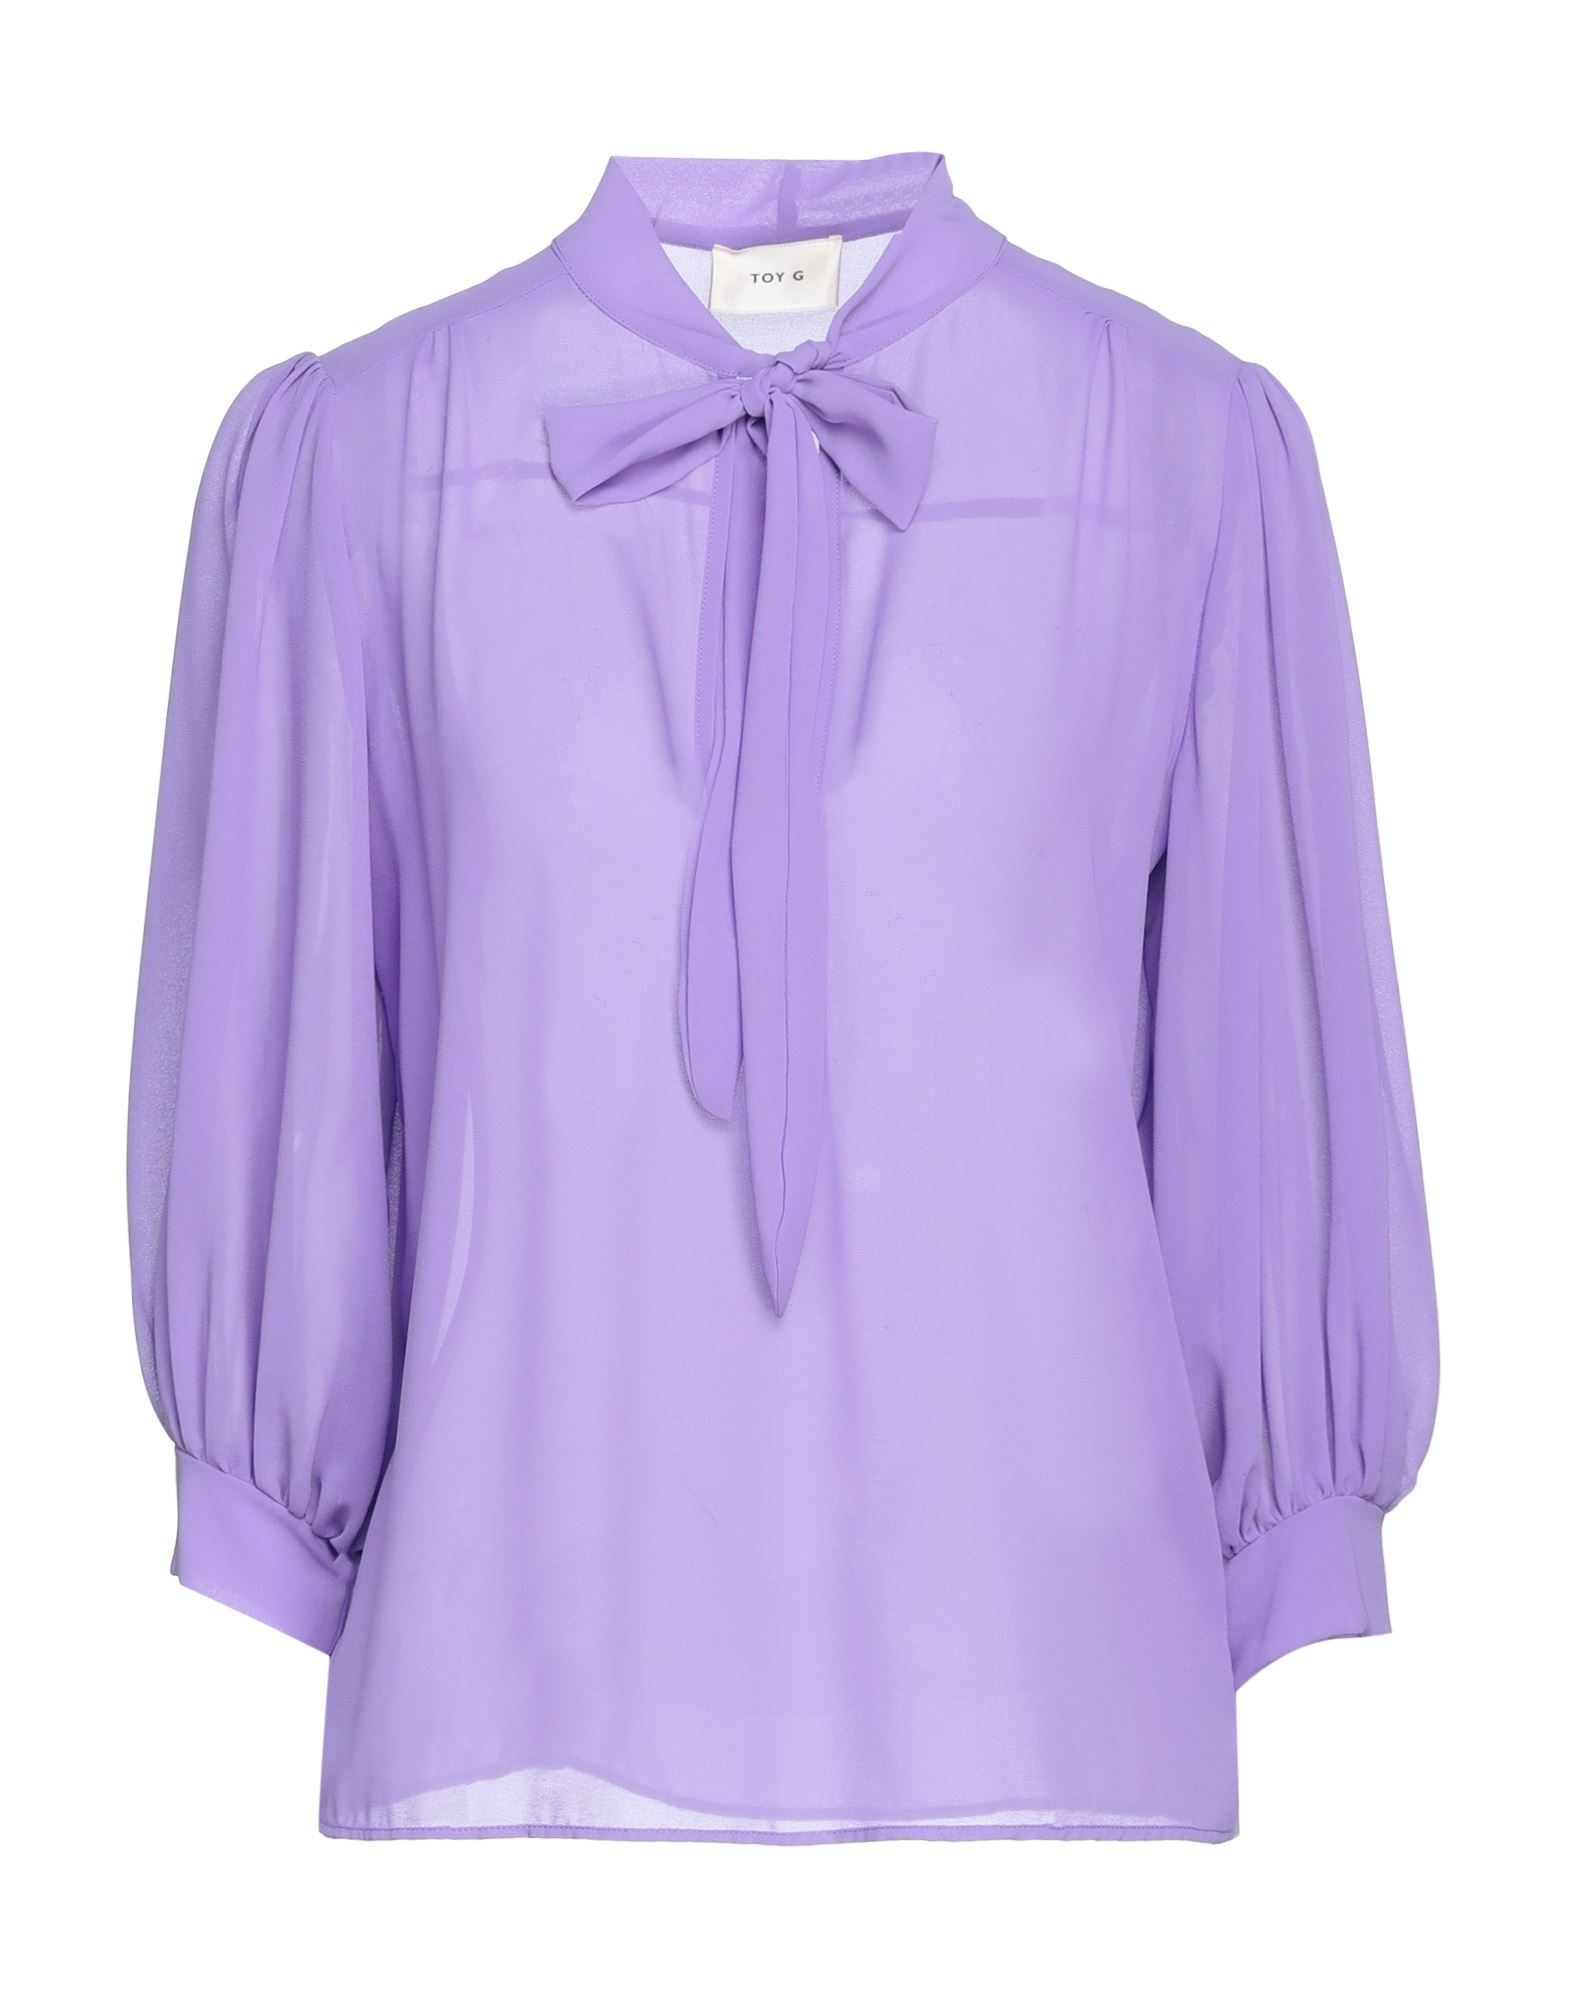 Toy G. Blouses In Purple